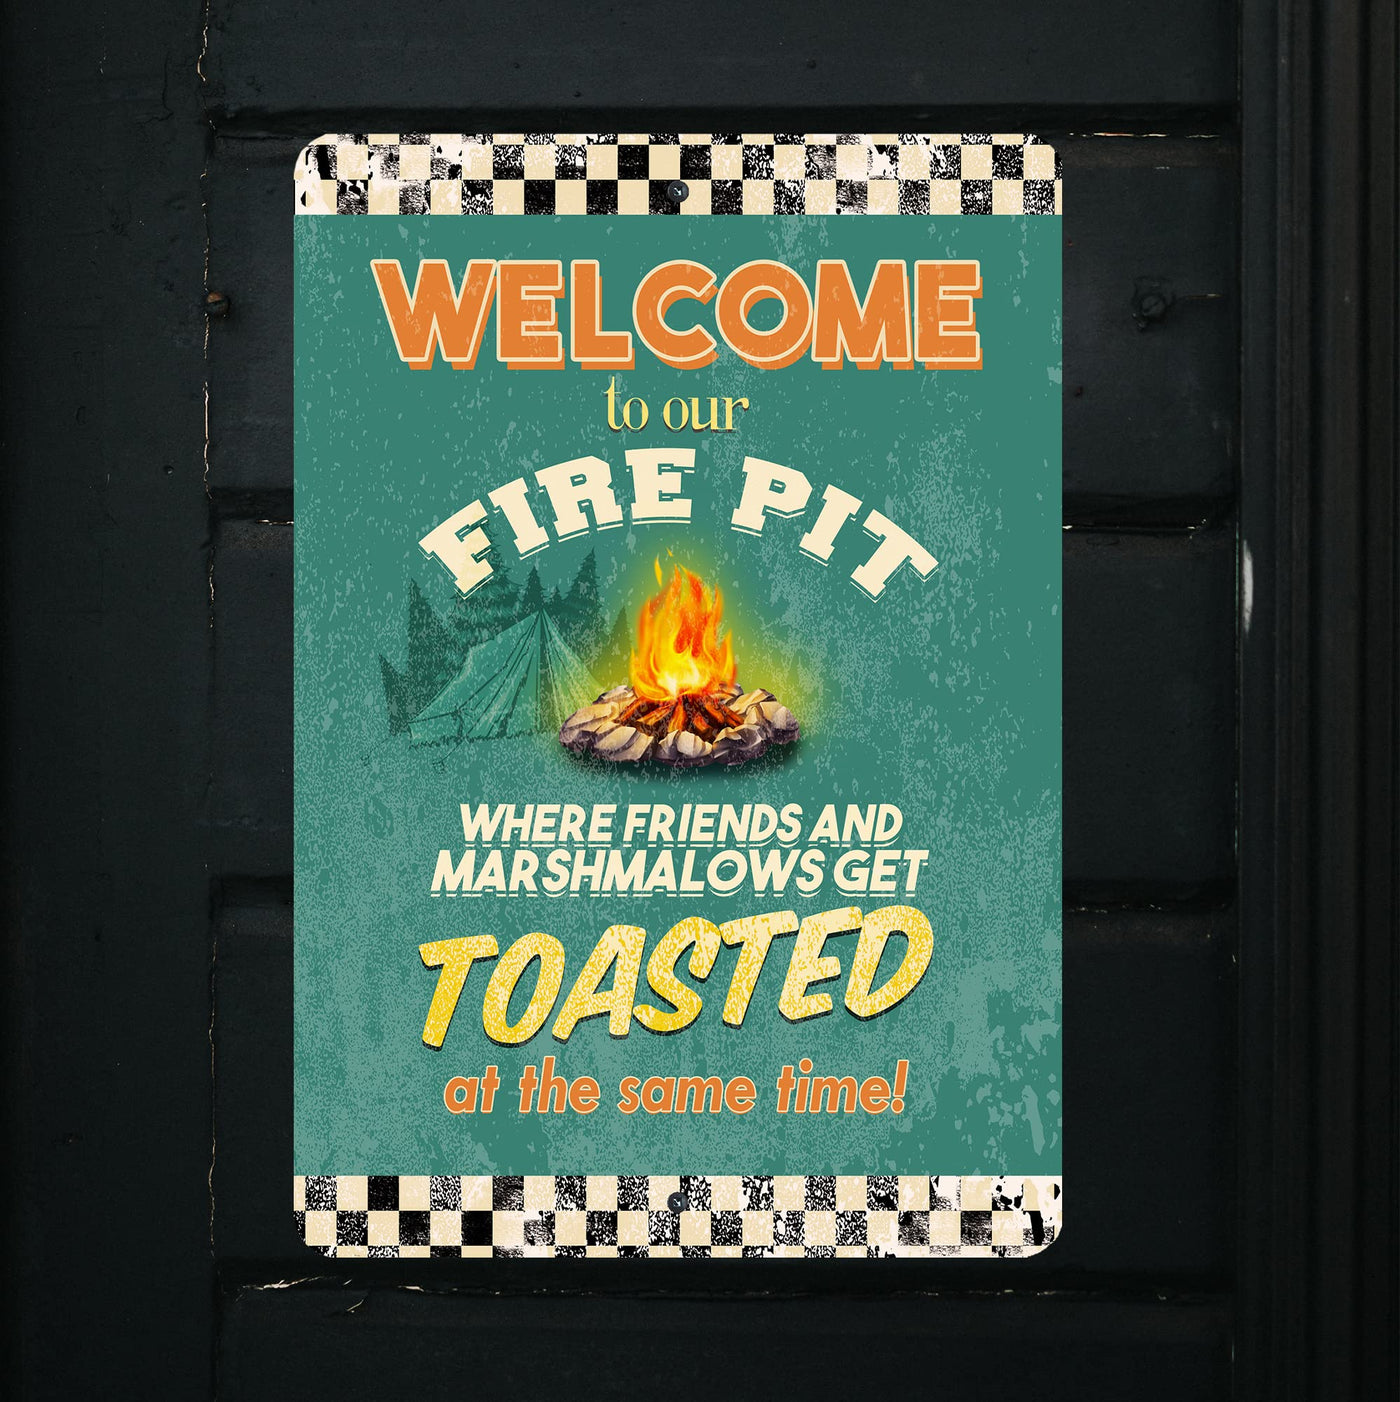 Welcome to Our Fire Pit Metal Signs Vintage Wall Art -8 x 12" Funny Rustic Outdoor Sign for Lake, Patio, Camp, Lodge - Tin Sign Decor for Home-Deck-Cabin- Mountain Themed Accessories & Gifts!